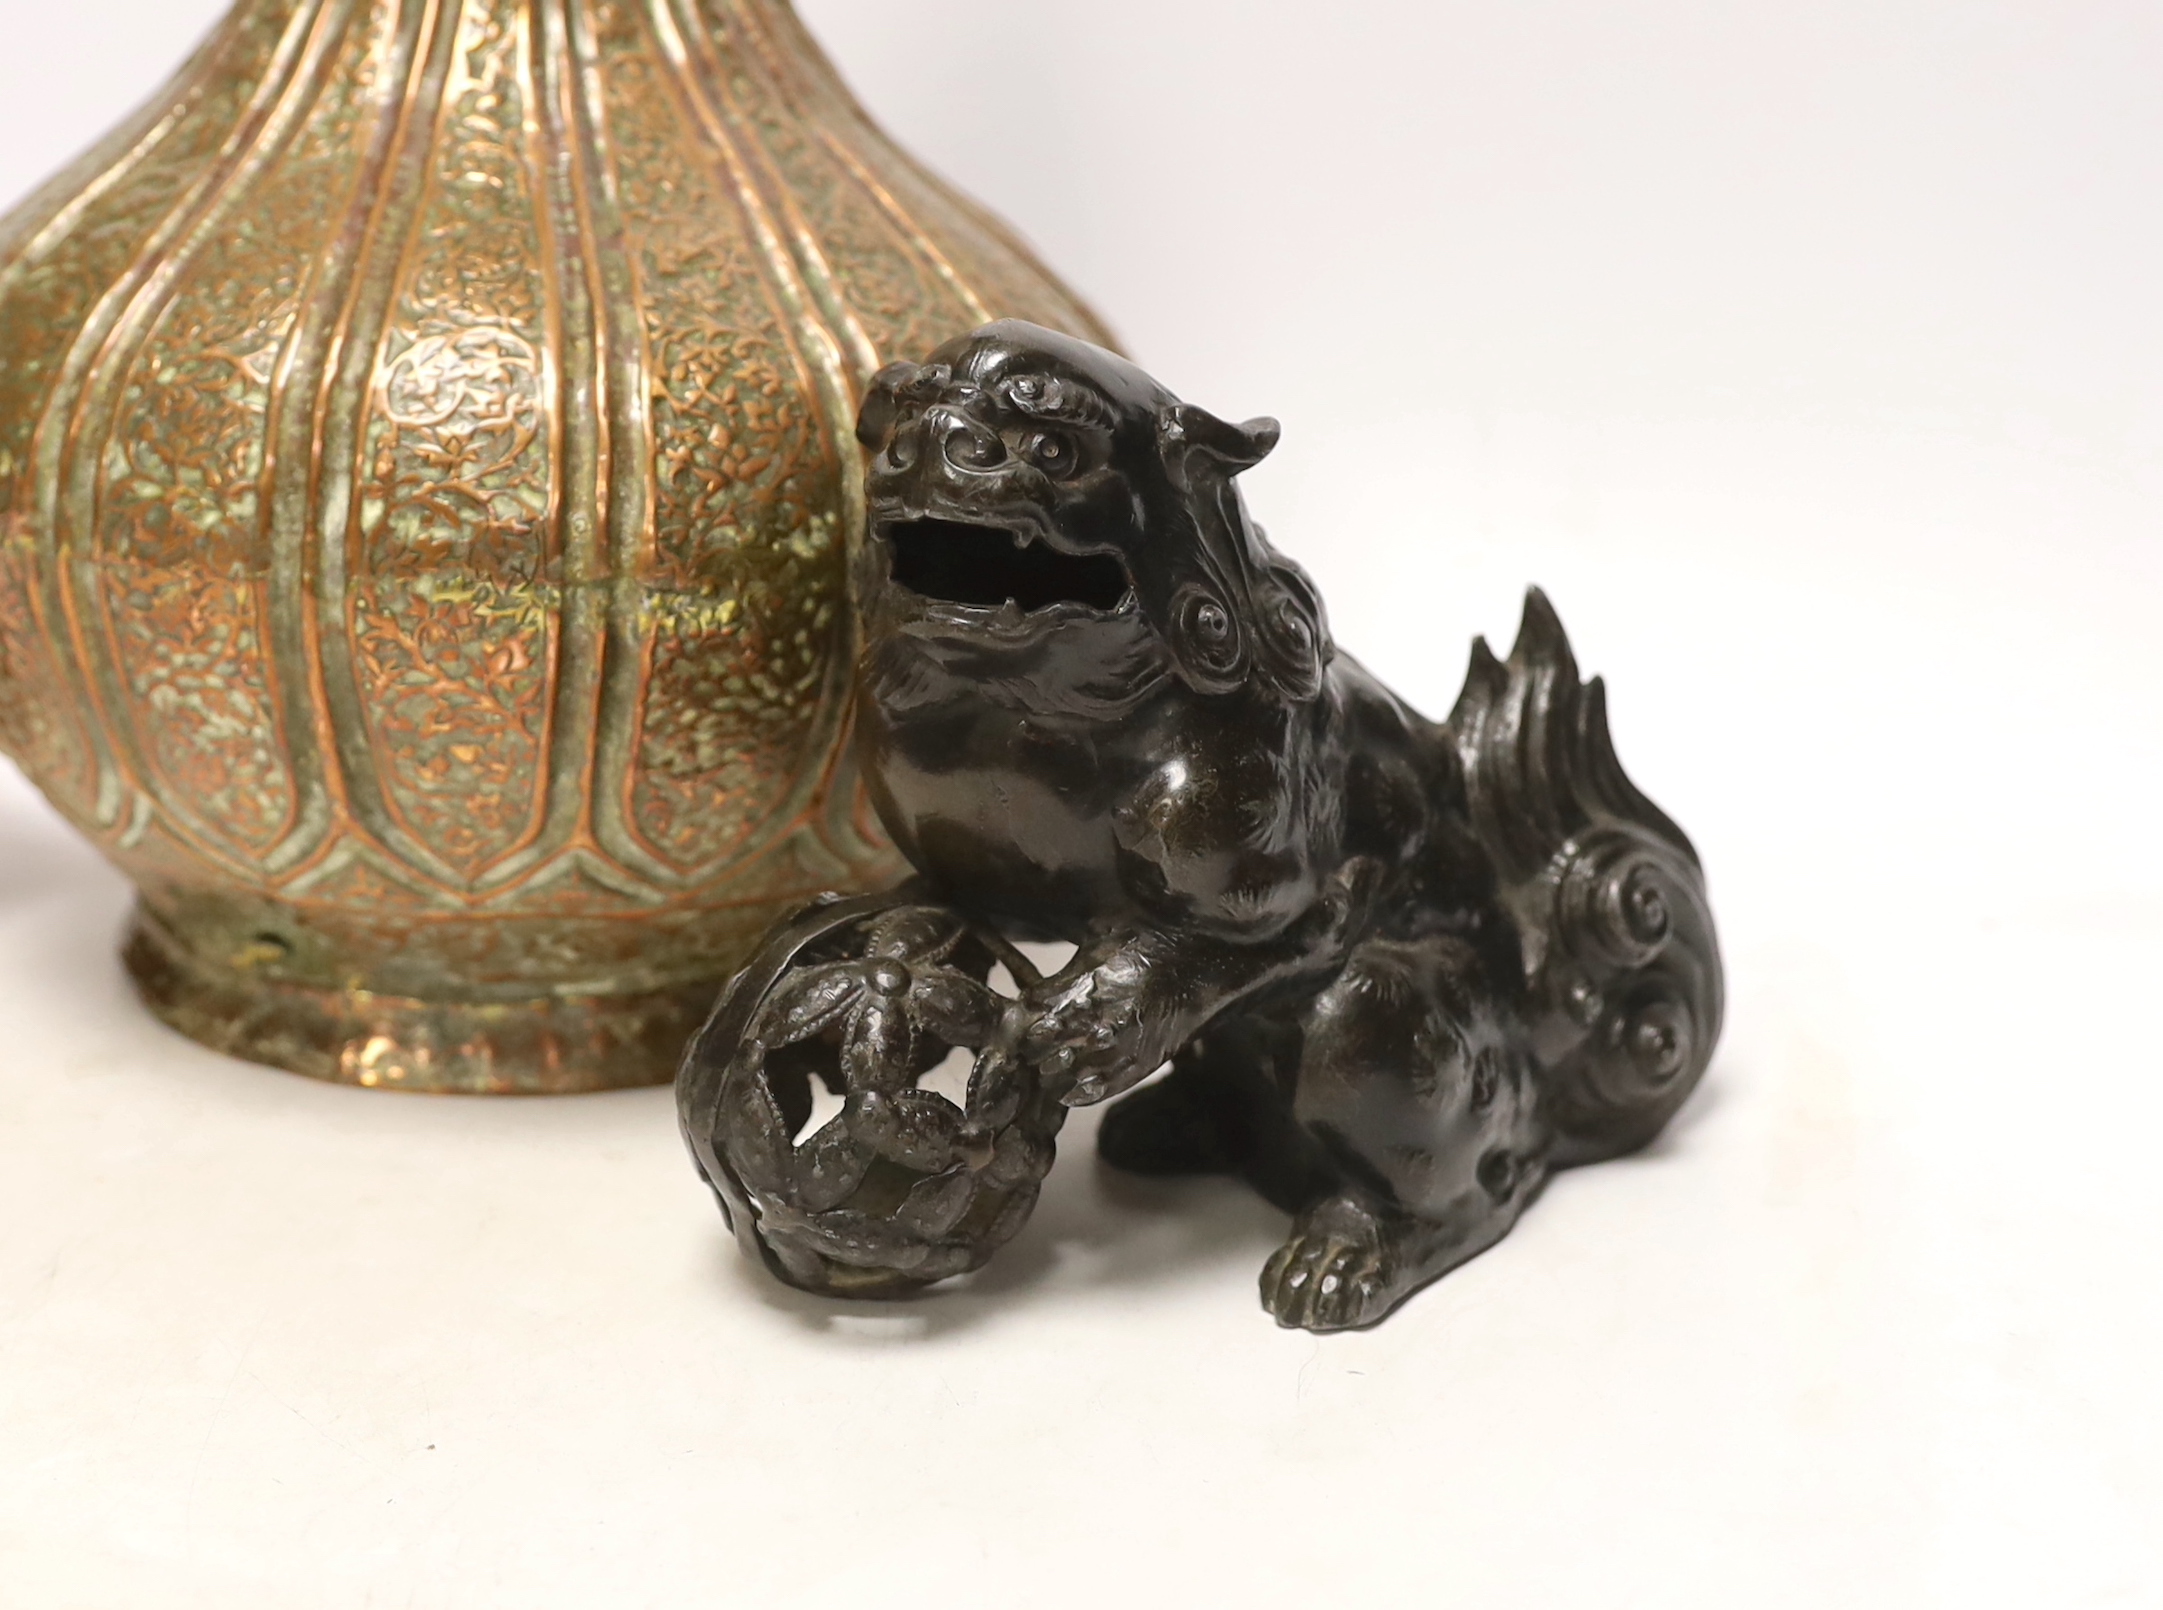 A Persian copper converted lamp, Chinese dog of Fo and a box and cover, tallest 34cm